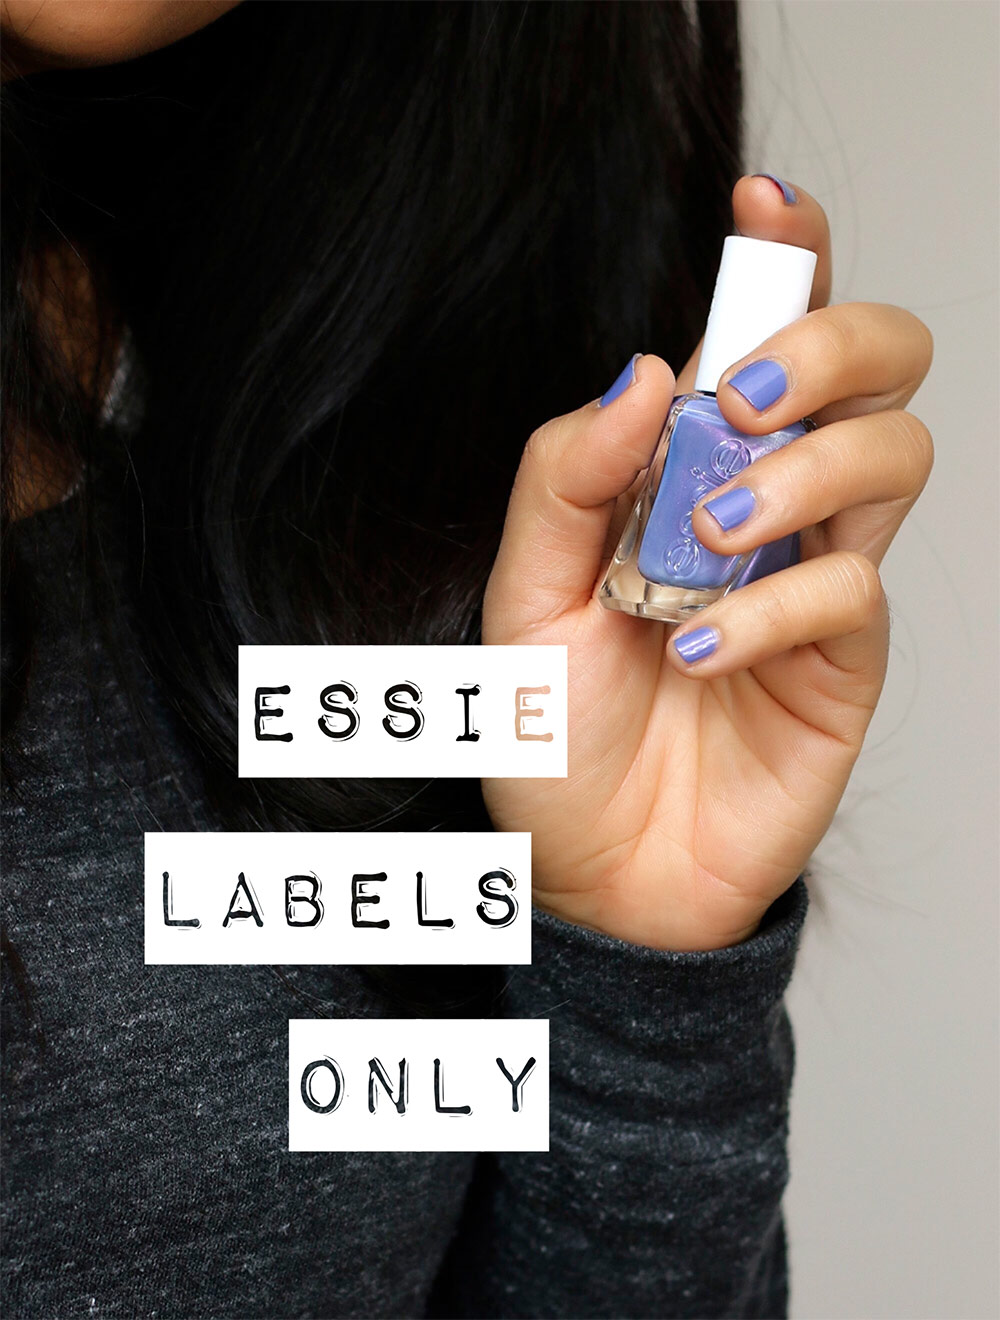 essie labels only top pic